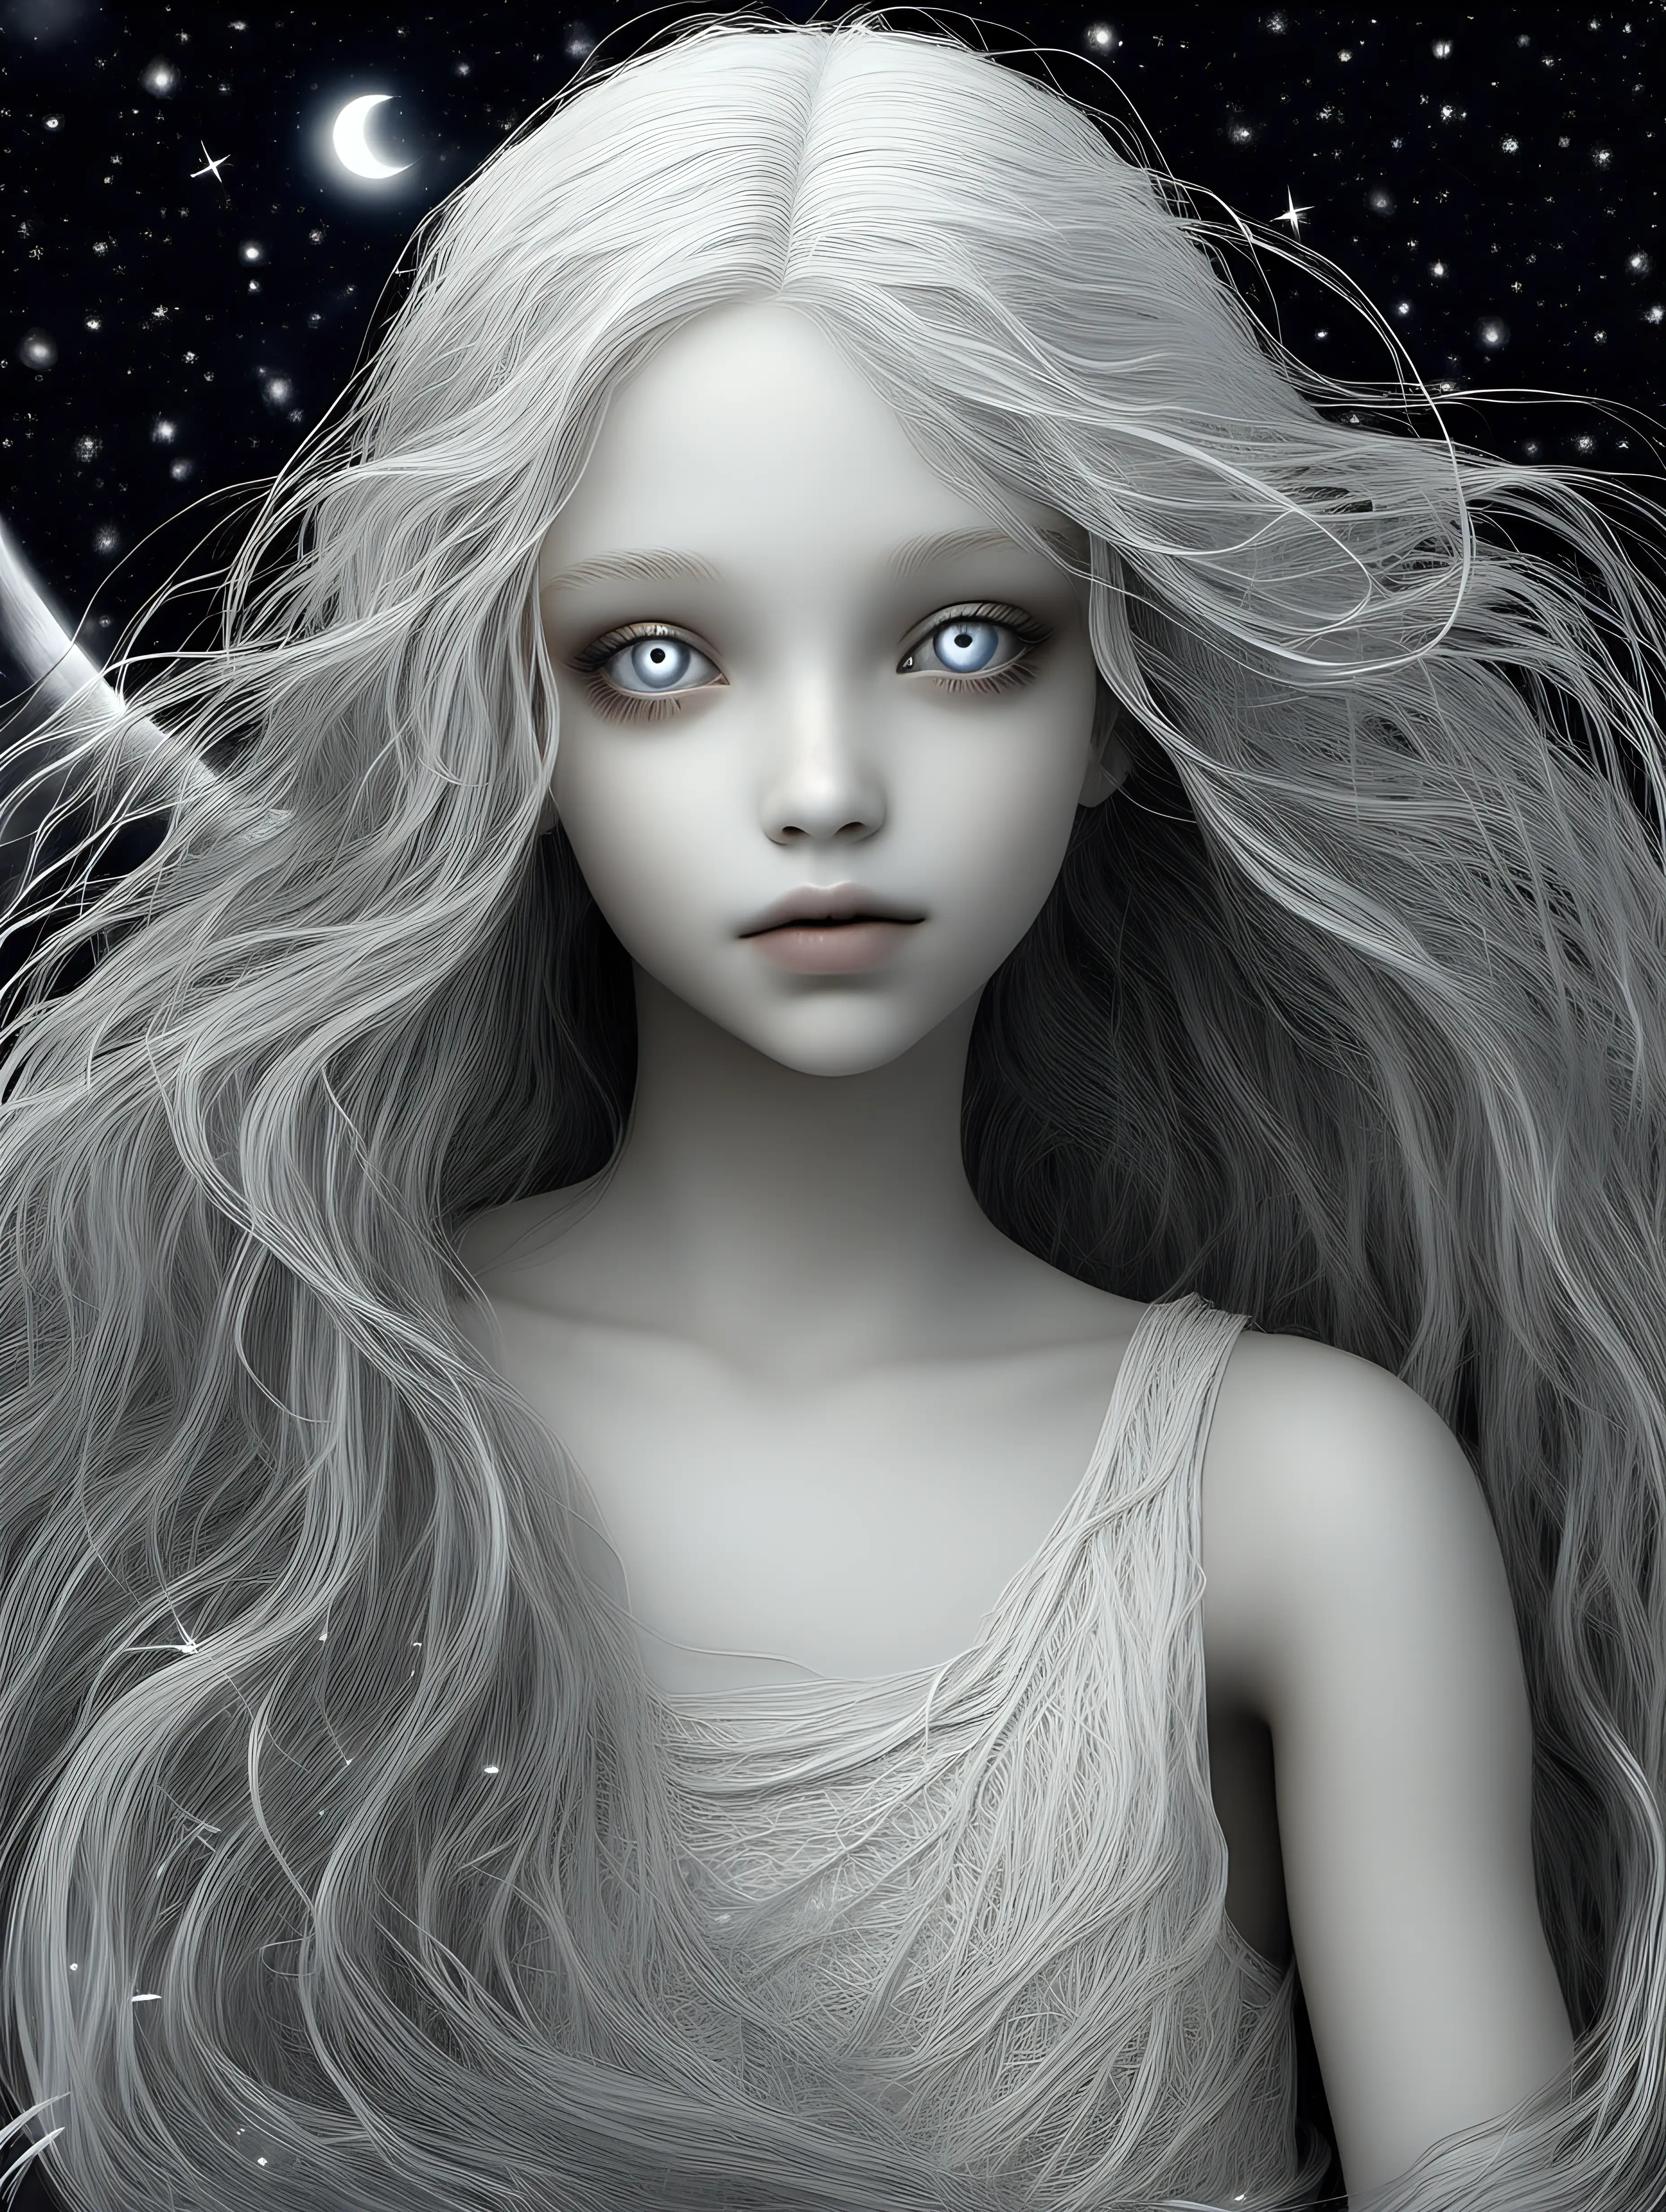 Luminous grey eyes, Weaving strands from the moon beams. Annie sews happy dreams Woven with starlight, pure and white. Annie May, with age-kissed face, “-v 6”